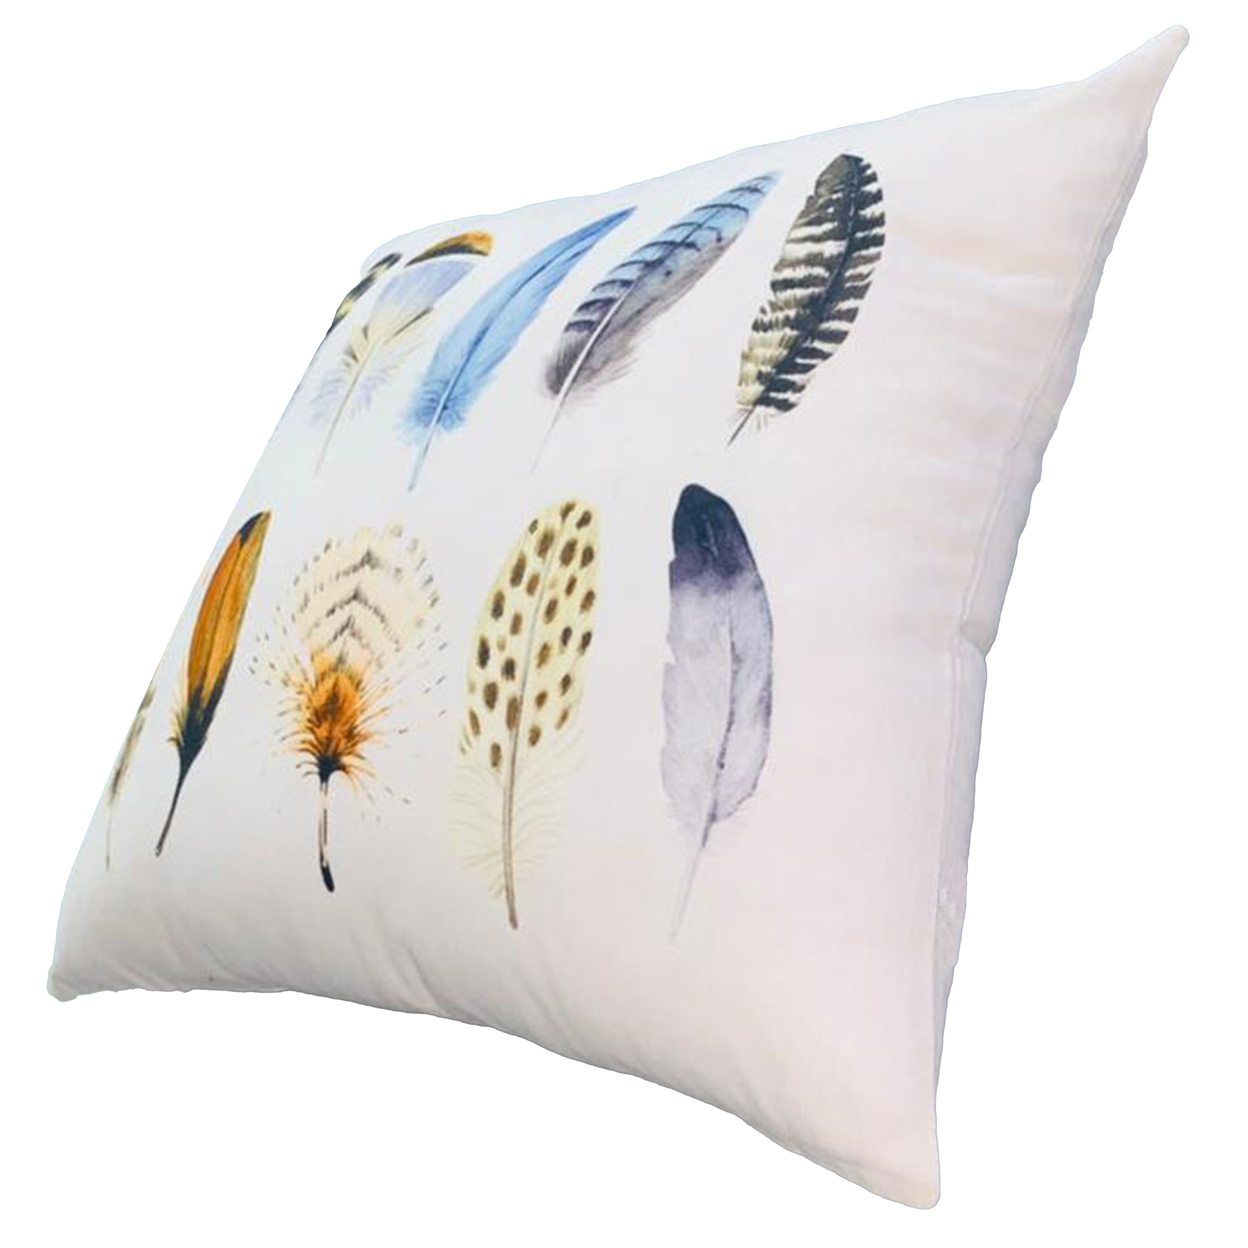 20 X 20 Square Cotton Accent Throw Pillows, Printed Feather Design, Set Of 2, White, Multicolor